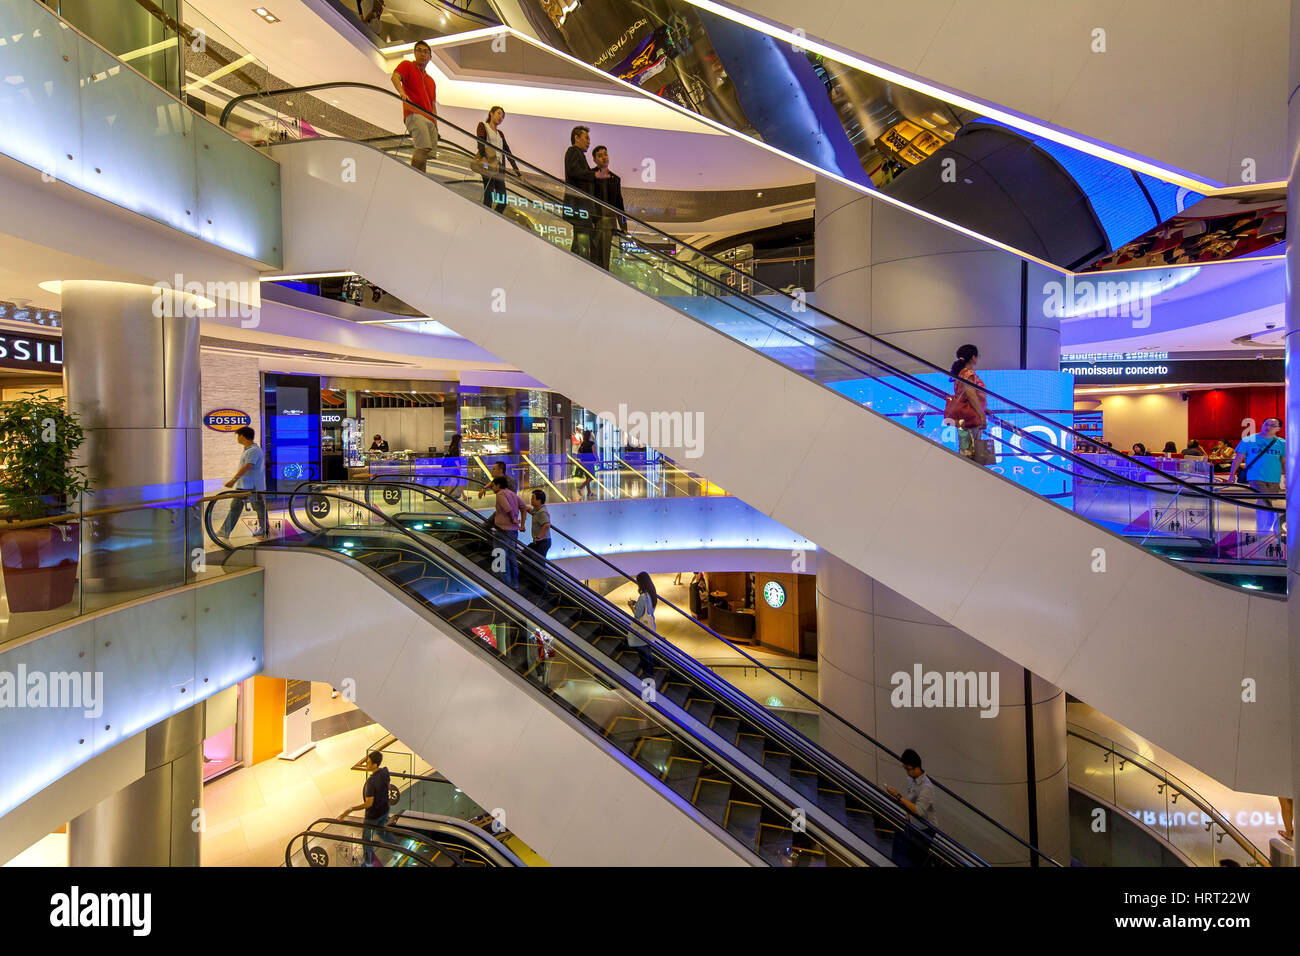 Tourists and locals shopping in a shopping center, escalators, Ion Orchard Mall, Orchard Road, Singapore, Asia, Singapore Stock Photo